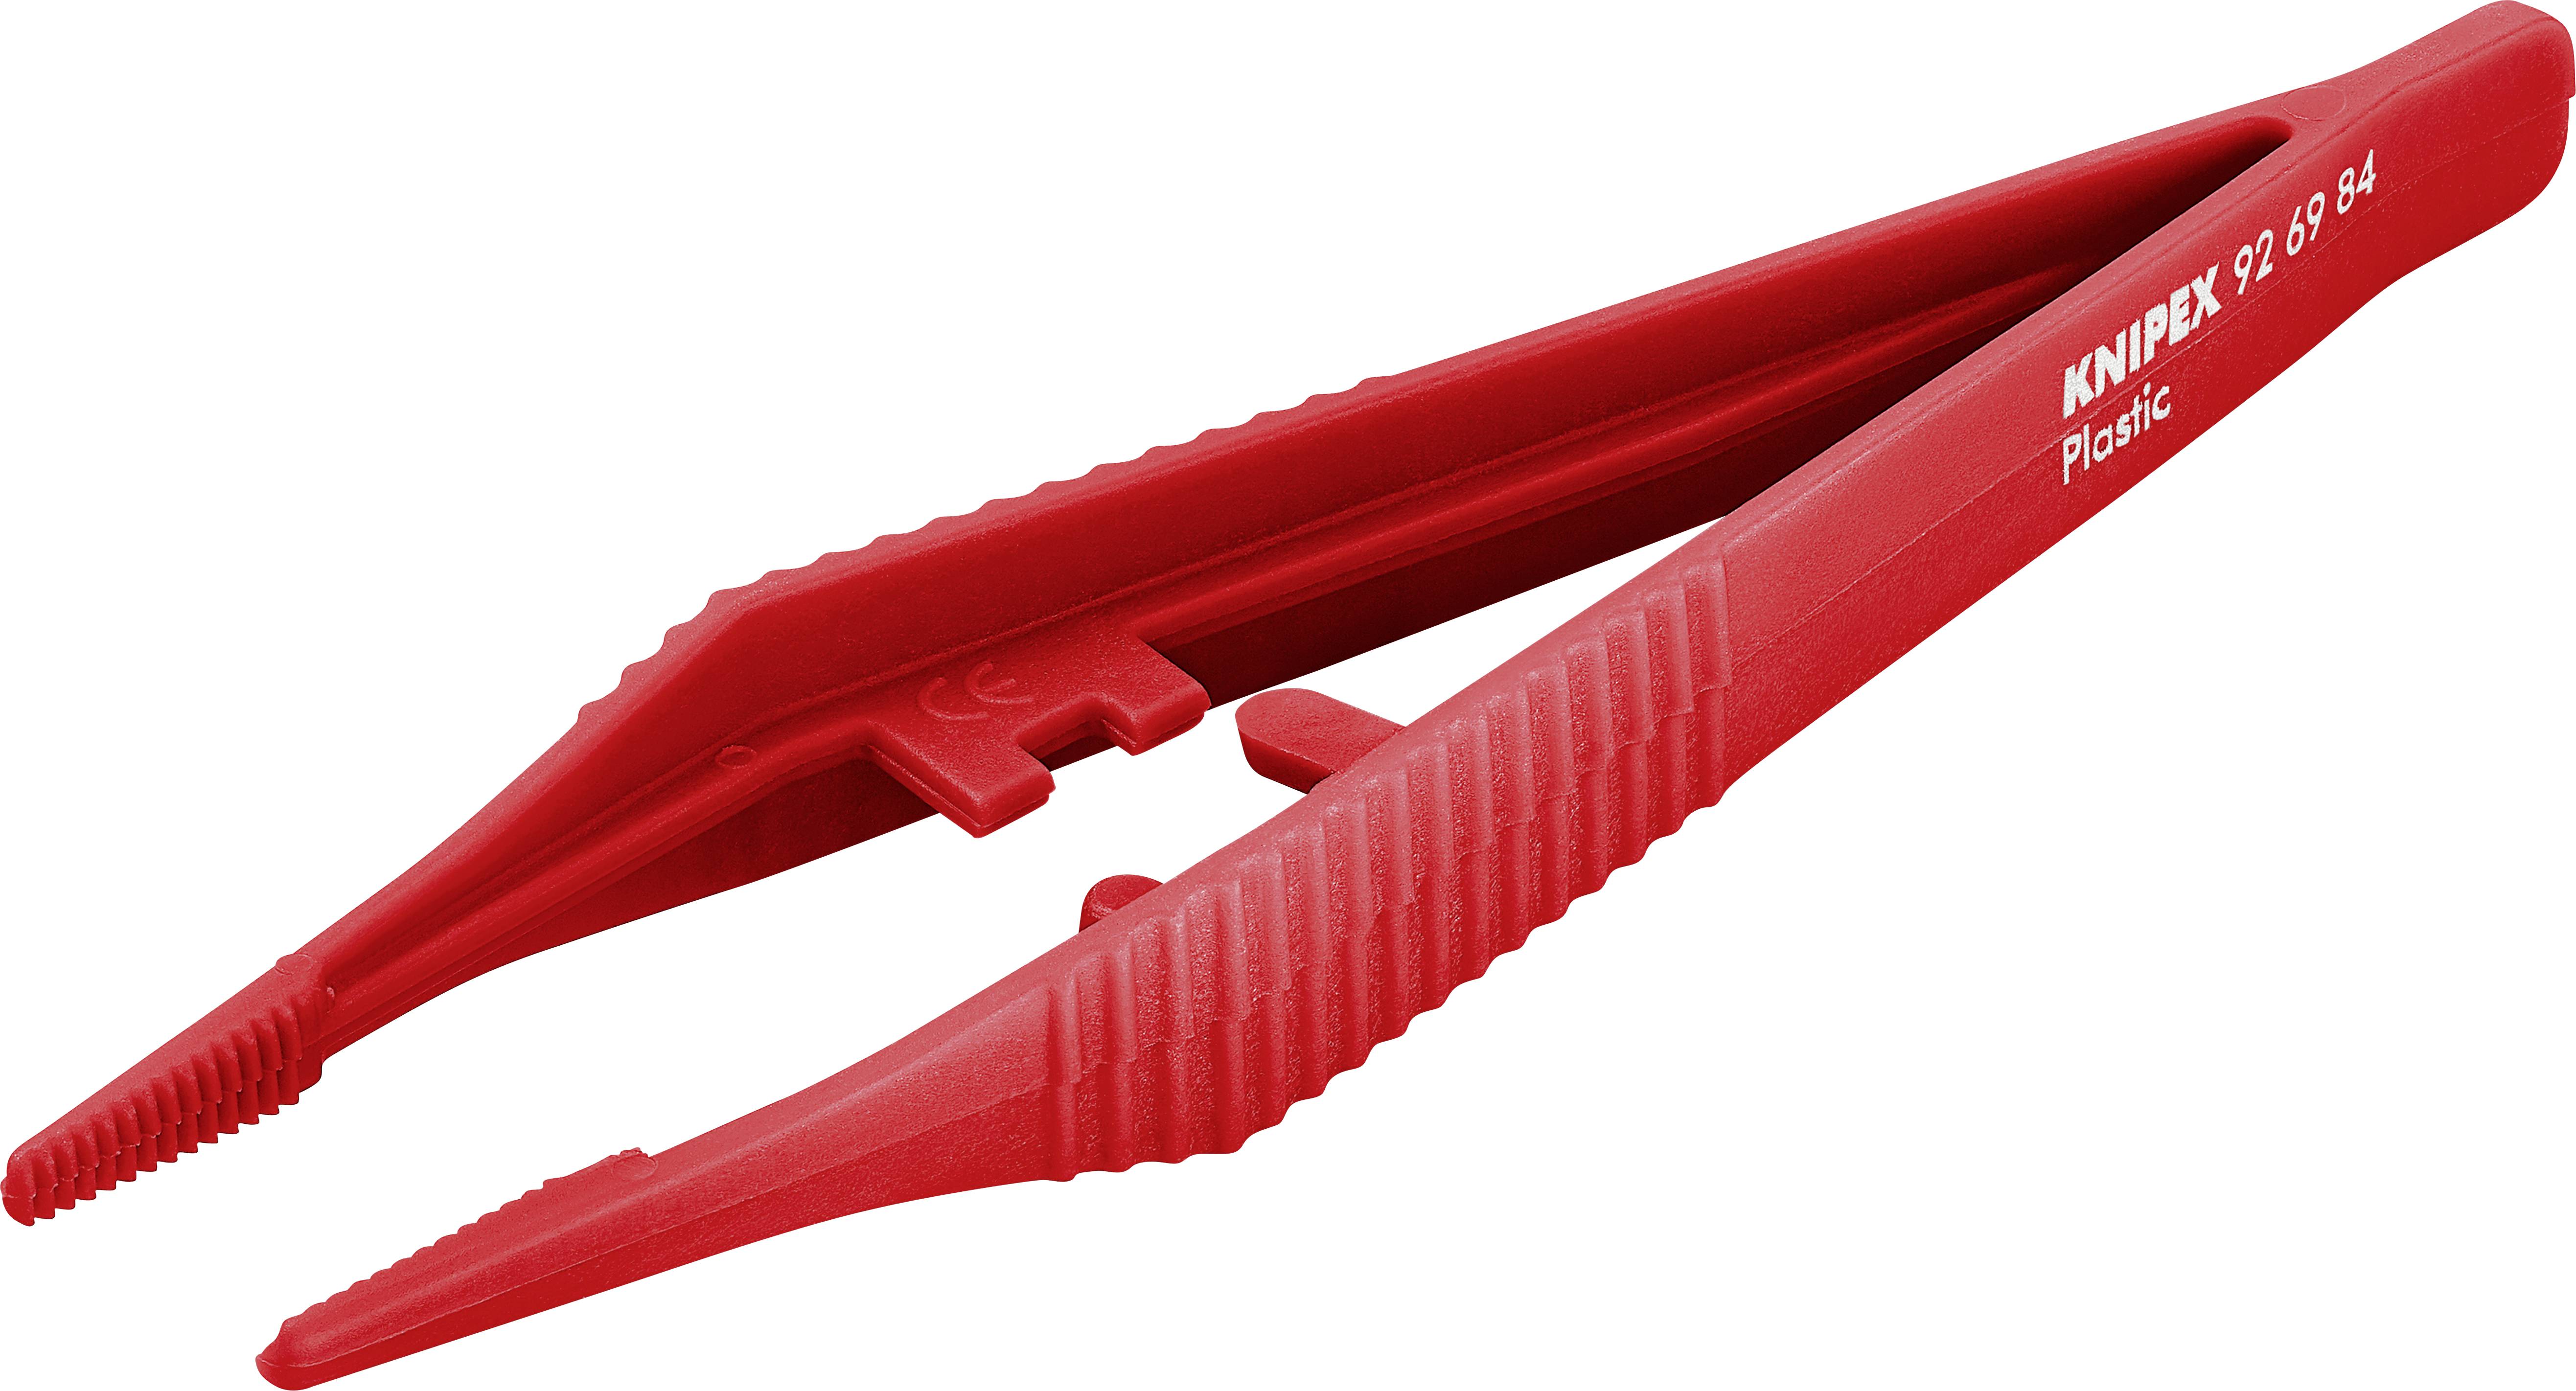 KNIPEX Präzisionspinzette Trapez 130 mm Knipex 92 69 84